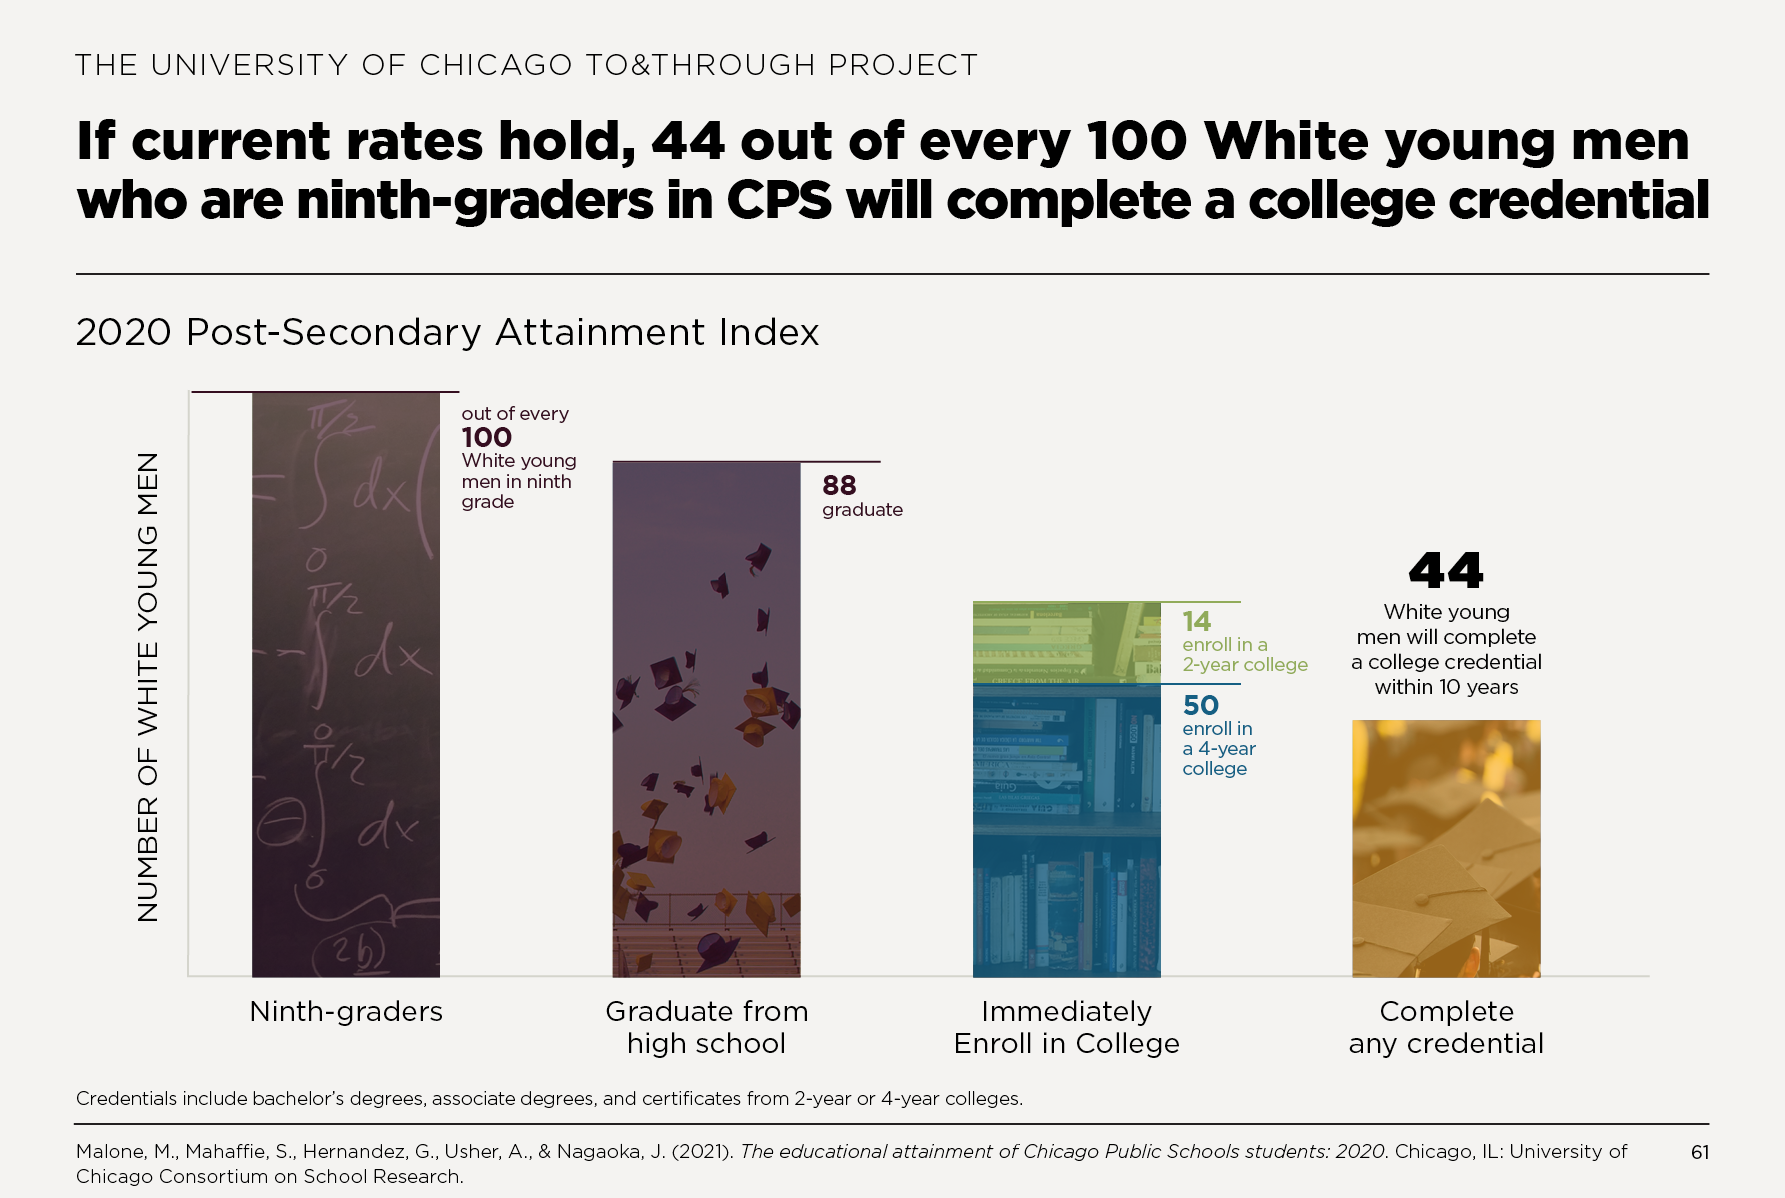 If current rates hold, 44 out of every 100 White young men who are ninth-graders in CPS will complete a college credential within 10 years